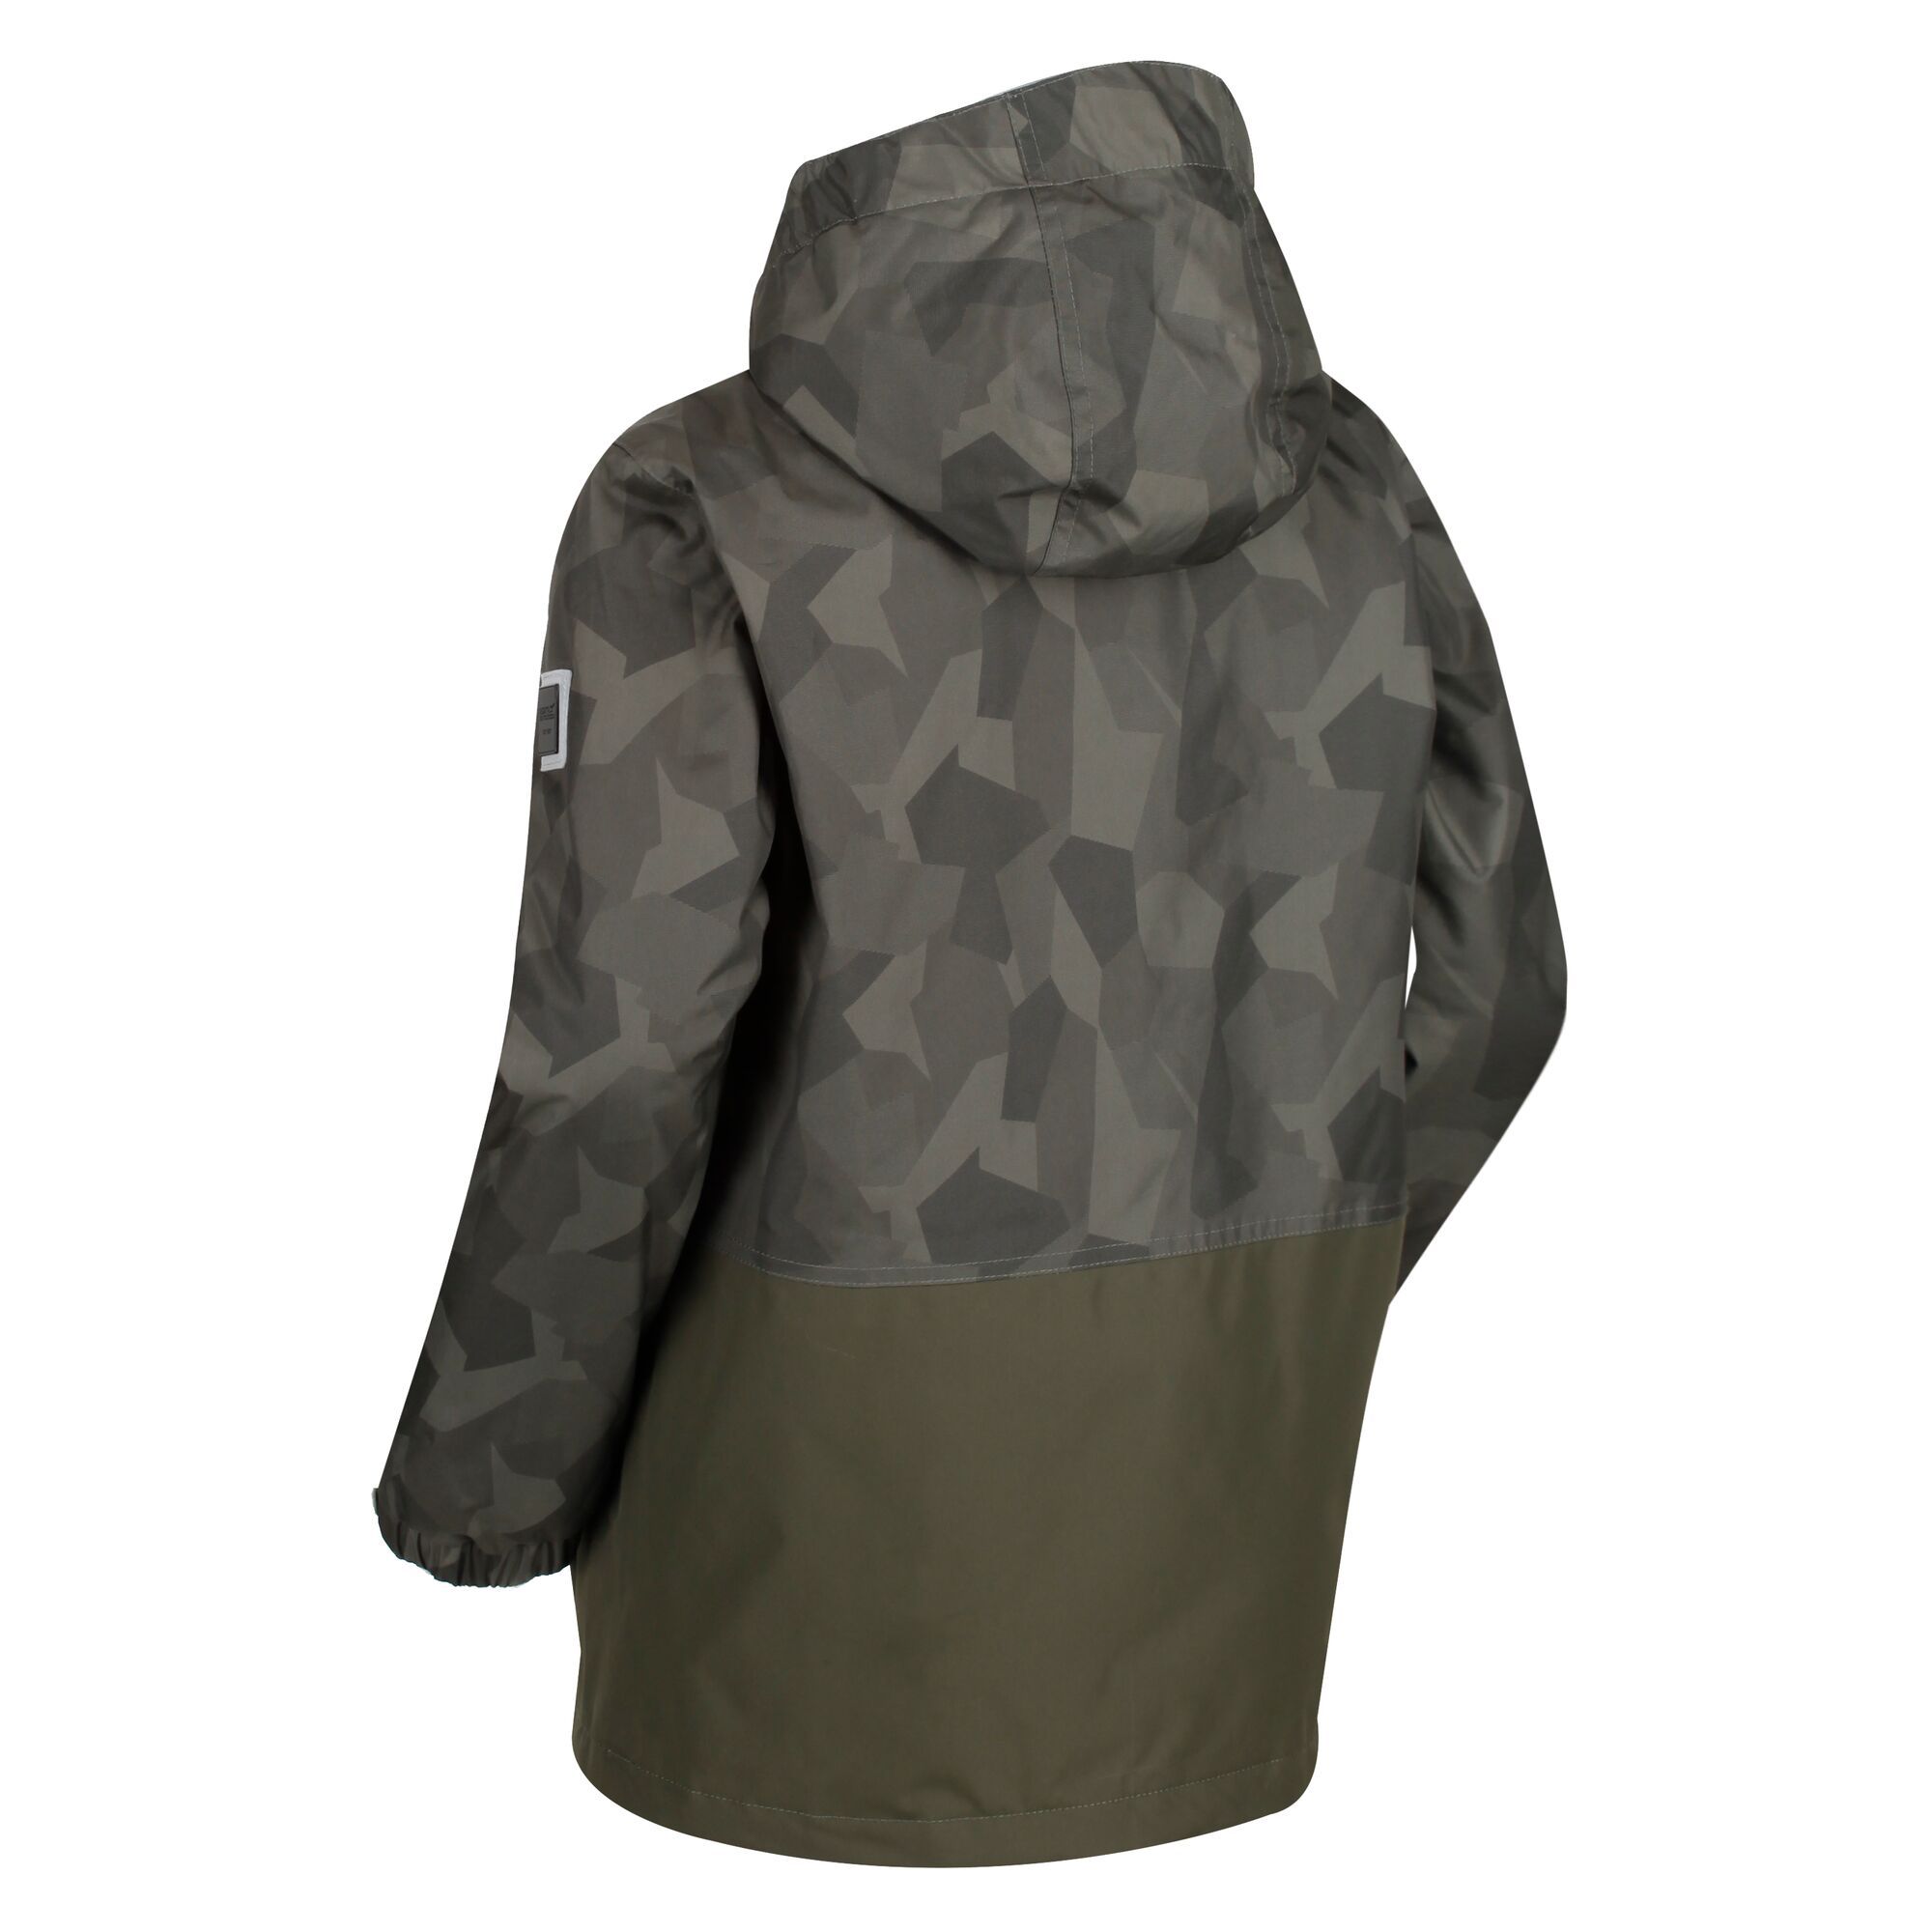 Material: polyester: 100%. Waterproof Hydrafort polyester fabric. Taped seams. Durable water repellent finish. Polyester lining with strategic sherpa fleece panel to body and hood. All over print to body panels. Grown on hood with elastication. Elasticated and adjustable cuffs. 2 lower handwarmer pockets with branded snap fastenings. Printed name label (up to age 8). Reflective trim.